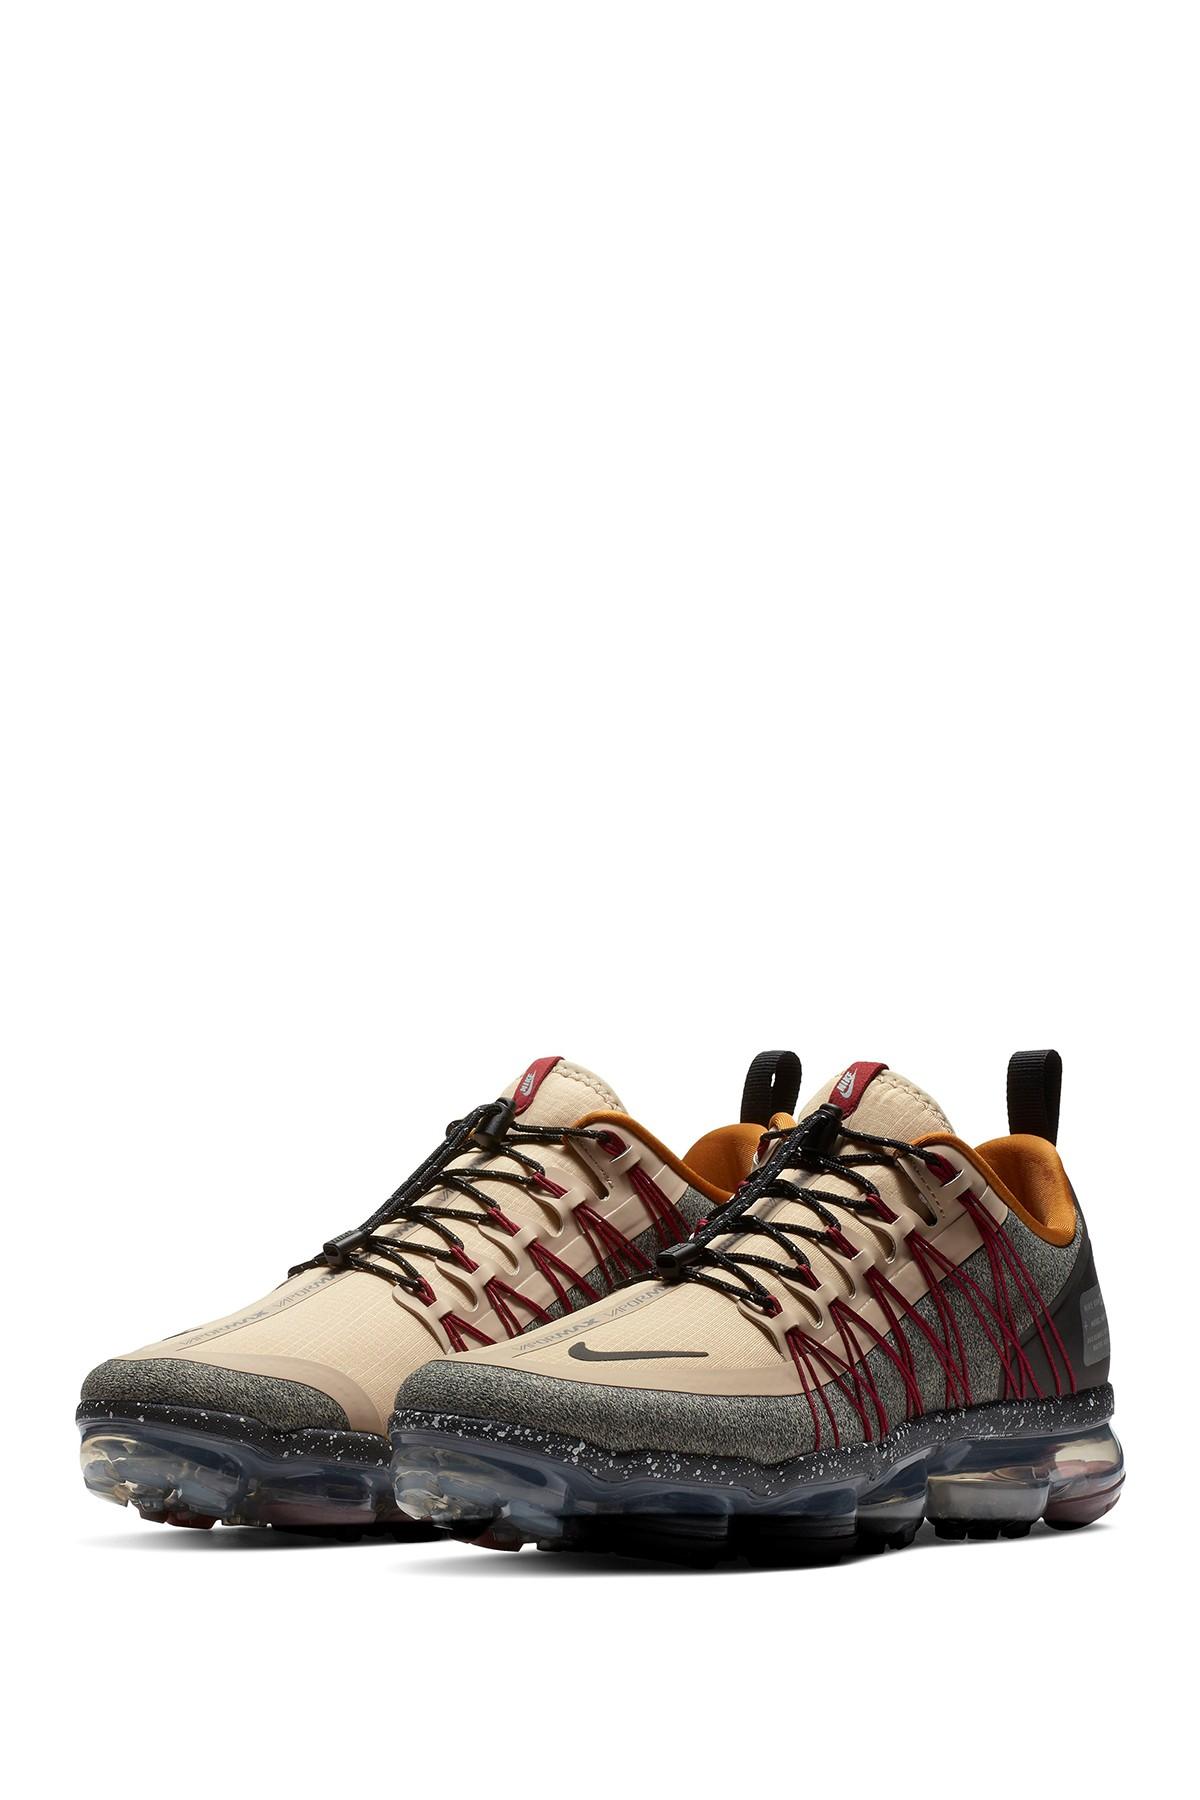 Nike Air Vapormax Utility Shoe in Brown for Men - Lyst